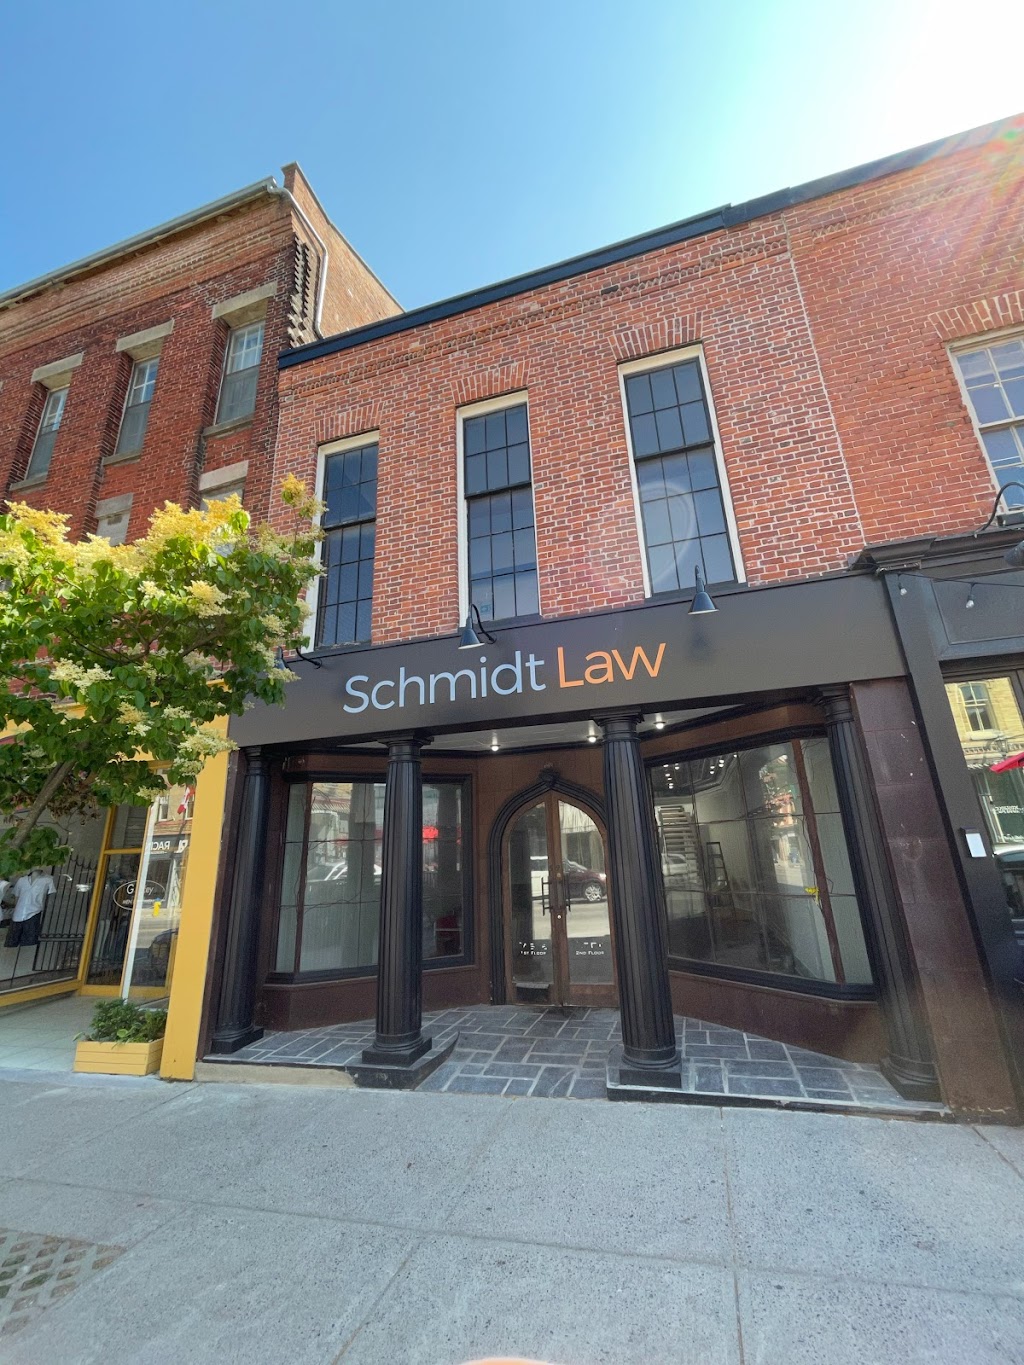 Schmidt Law Legal Services | lawyer | 59 Walton St, Port Hope, ON L1A 1N2, Canada | 2894360113 OR +1 289-436-0113